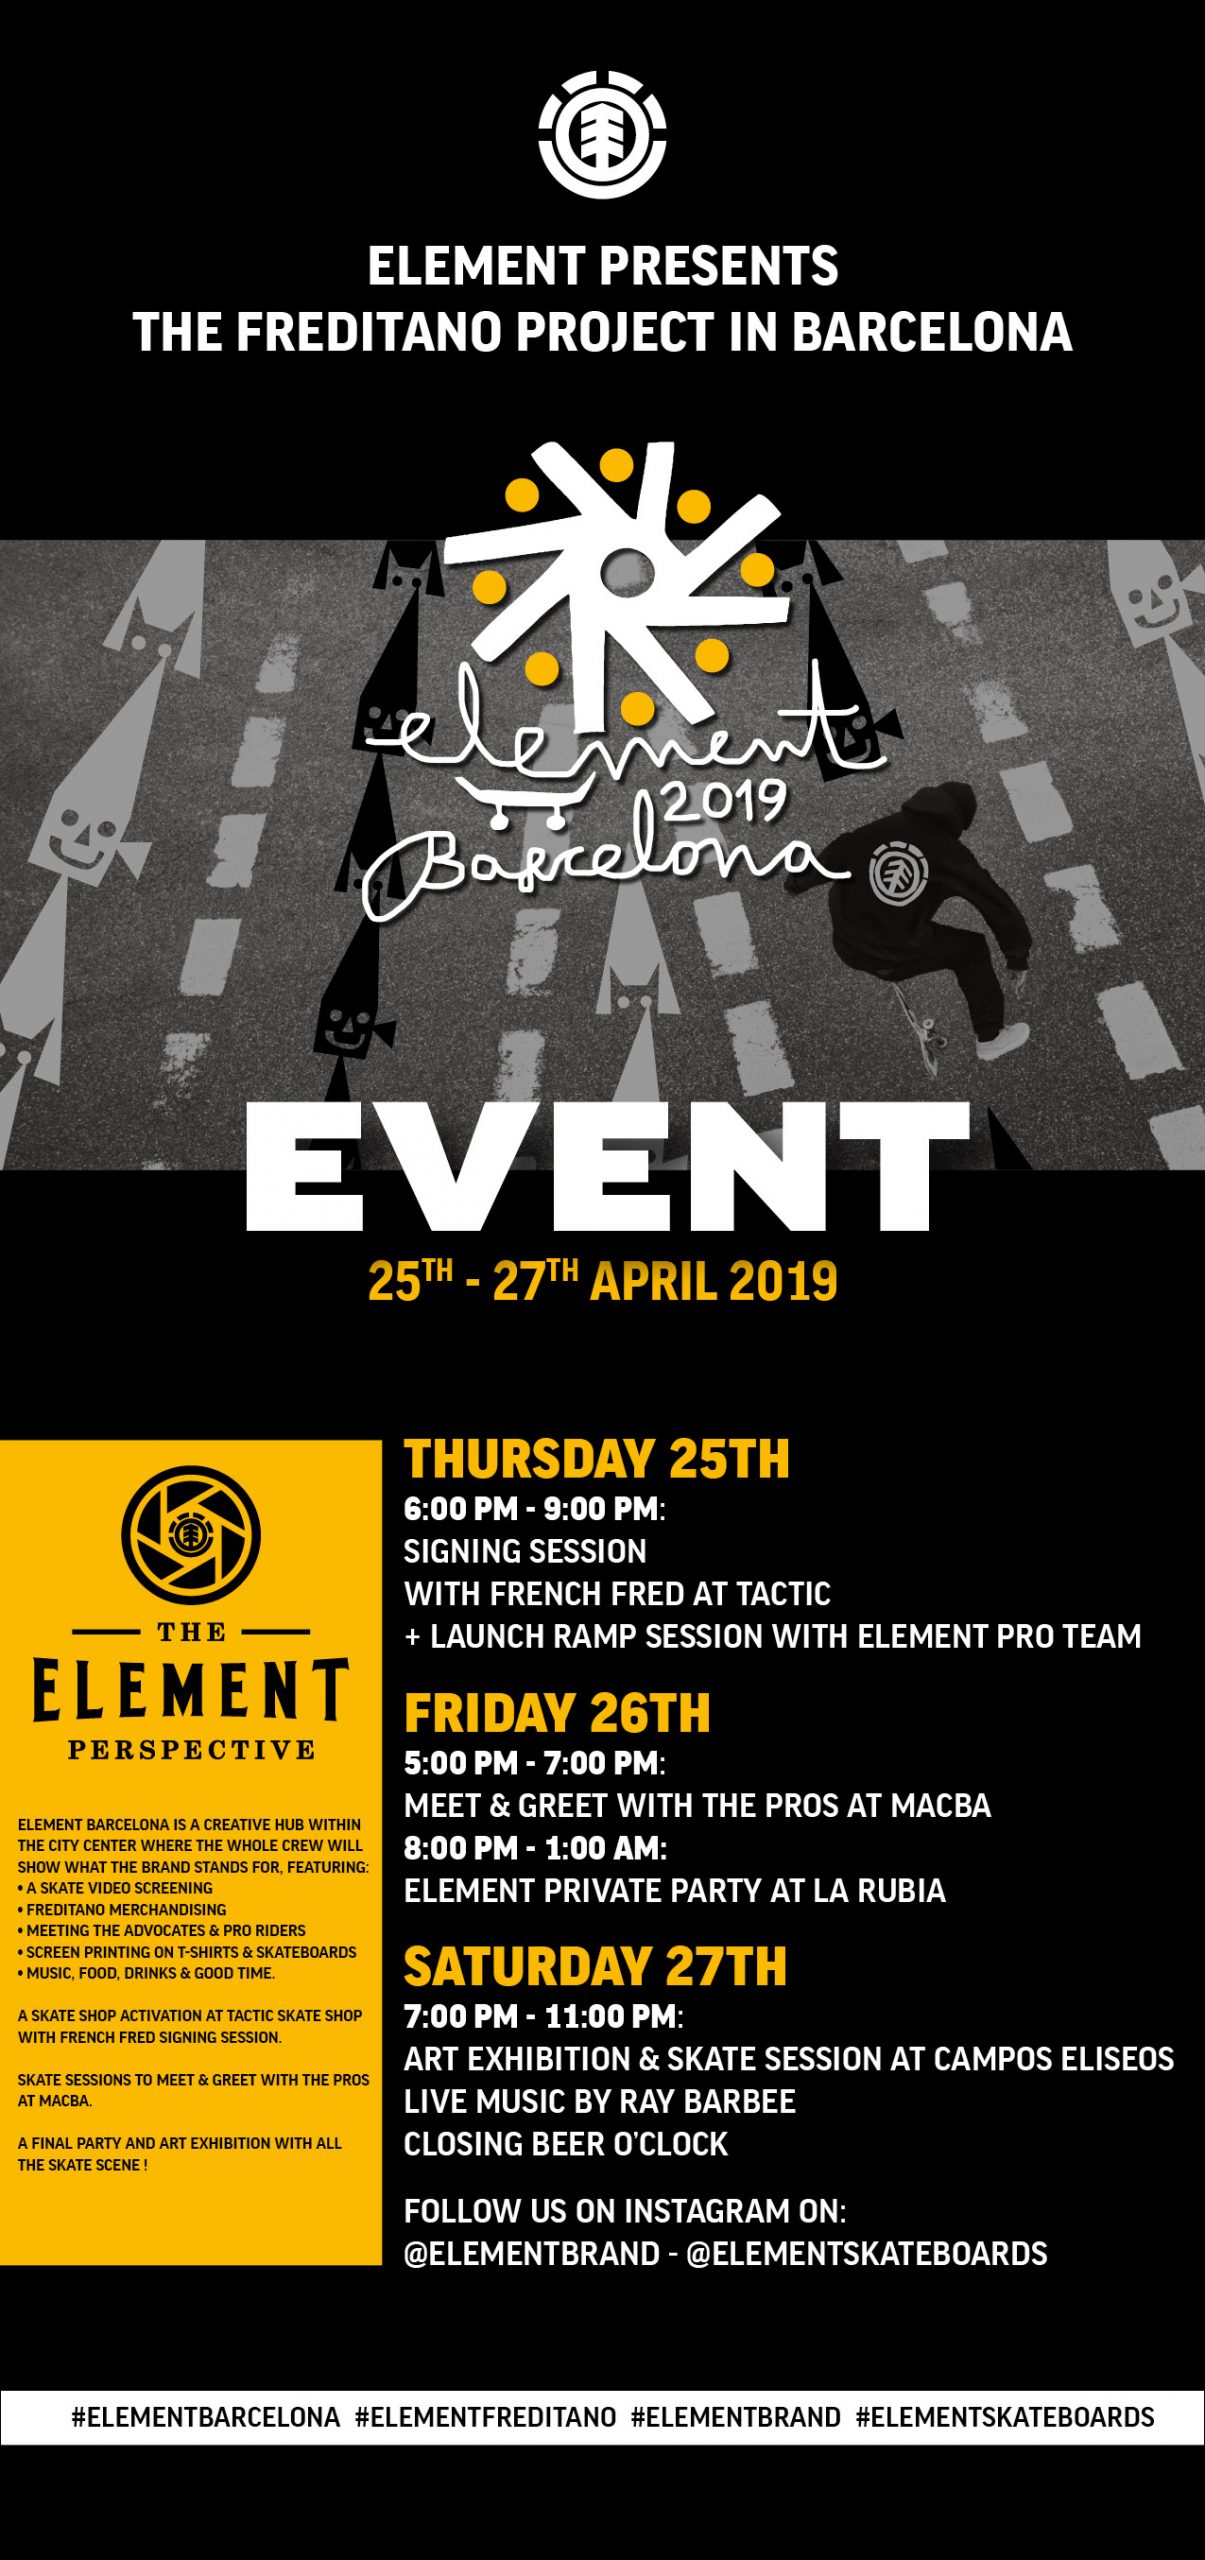 ELEMENT BARCELONA featuring the FREDITANO PROJECT